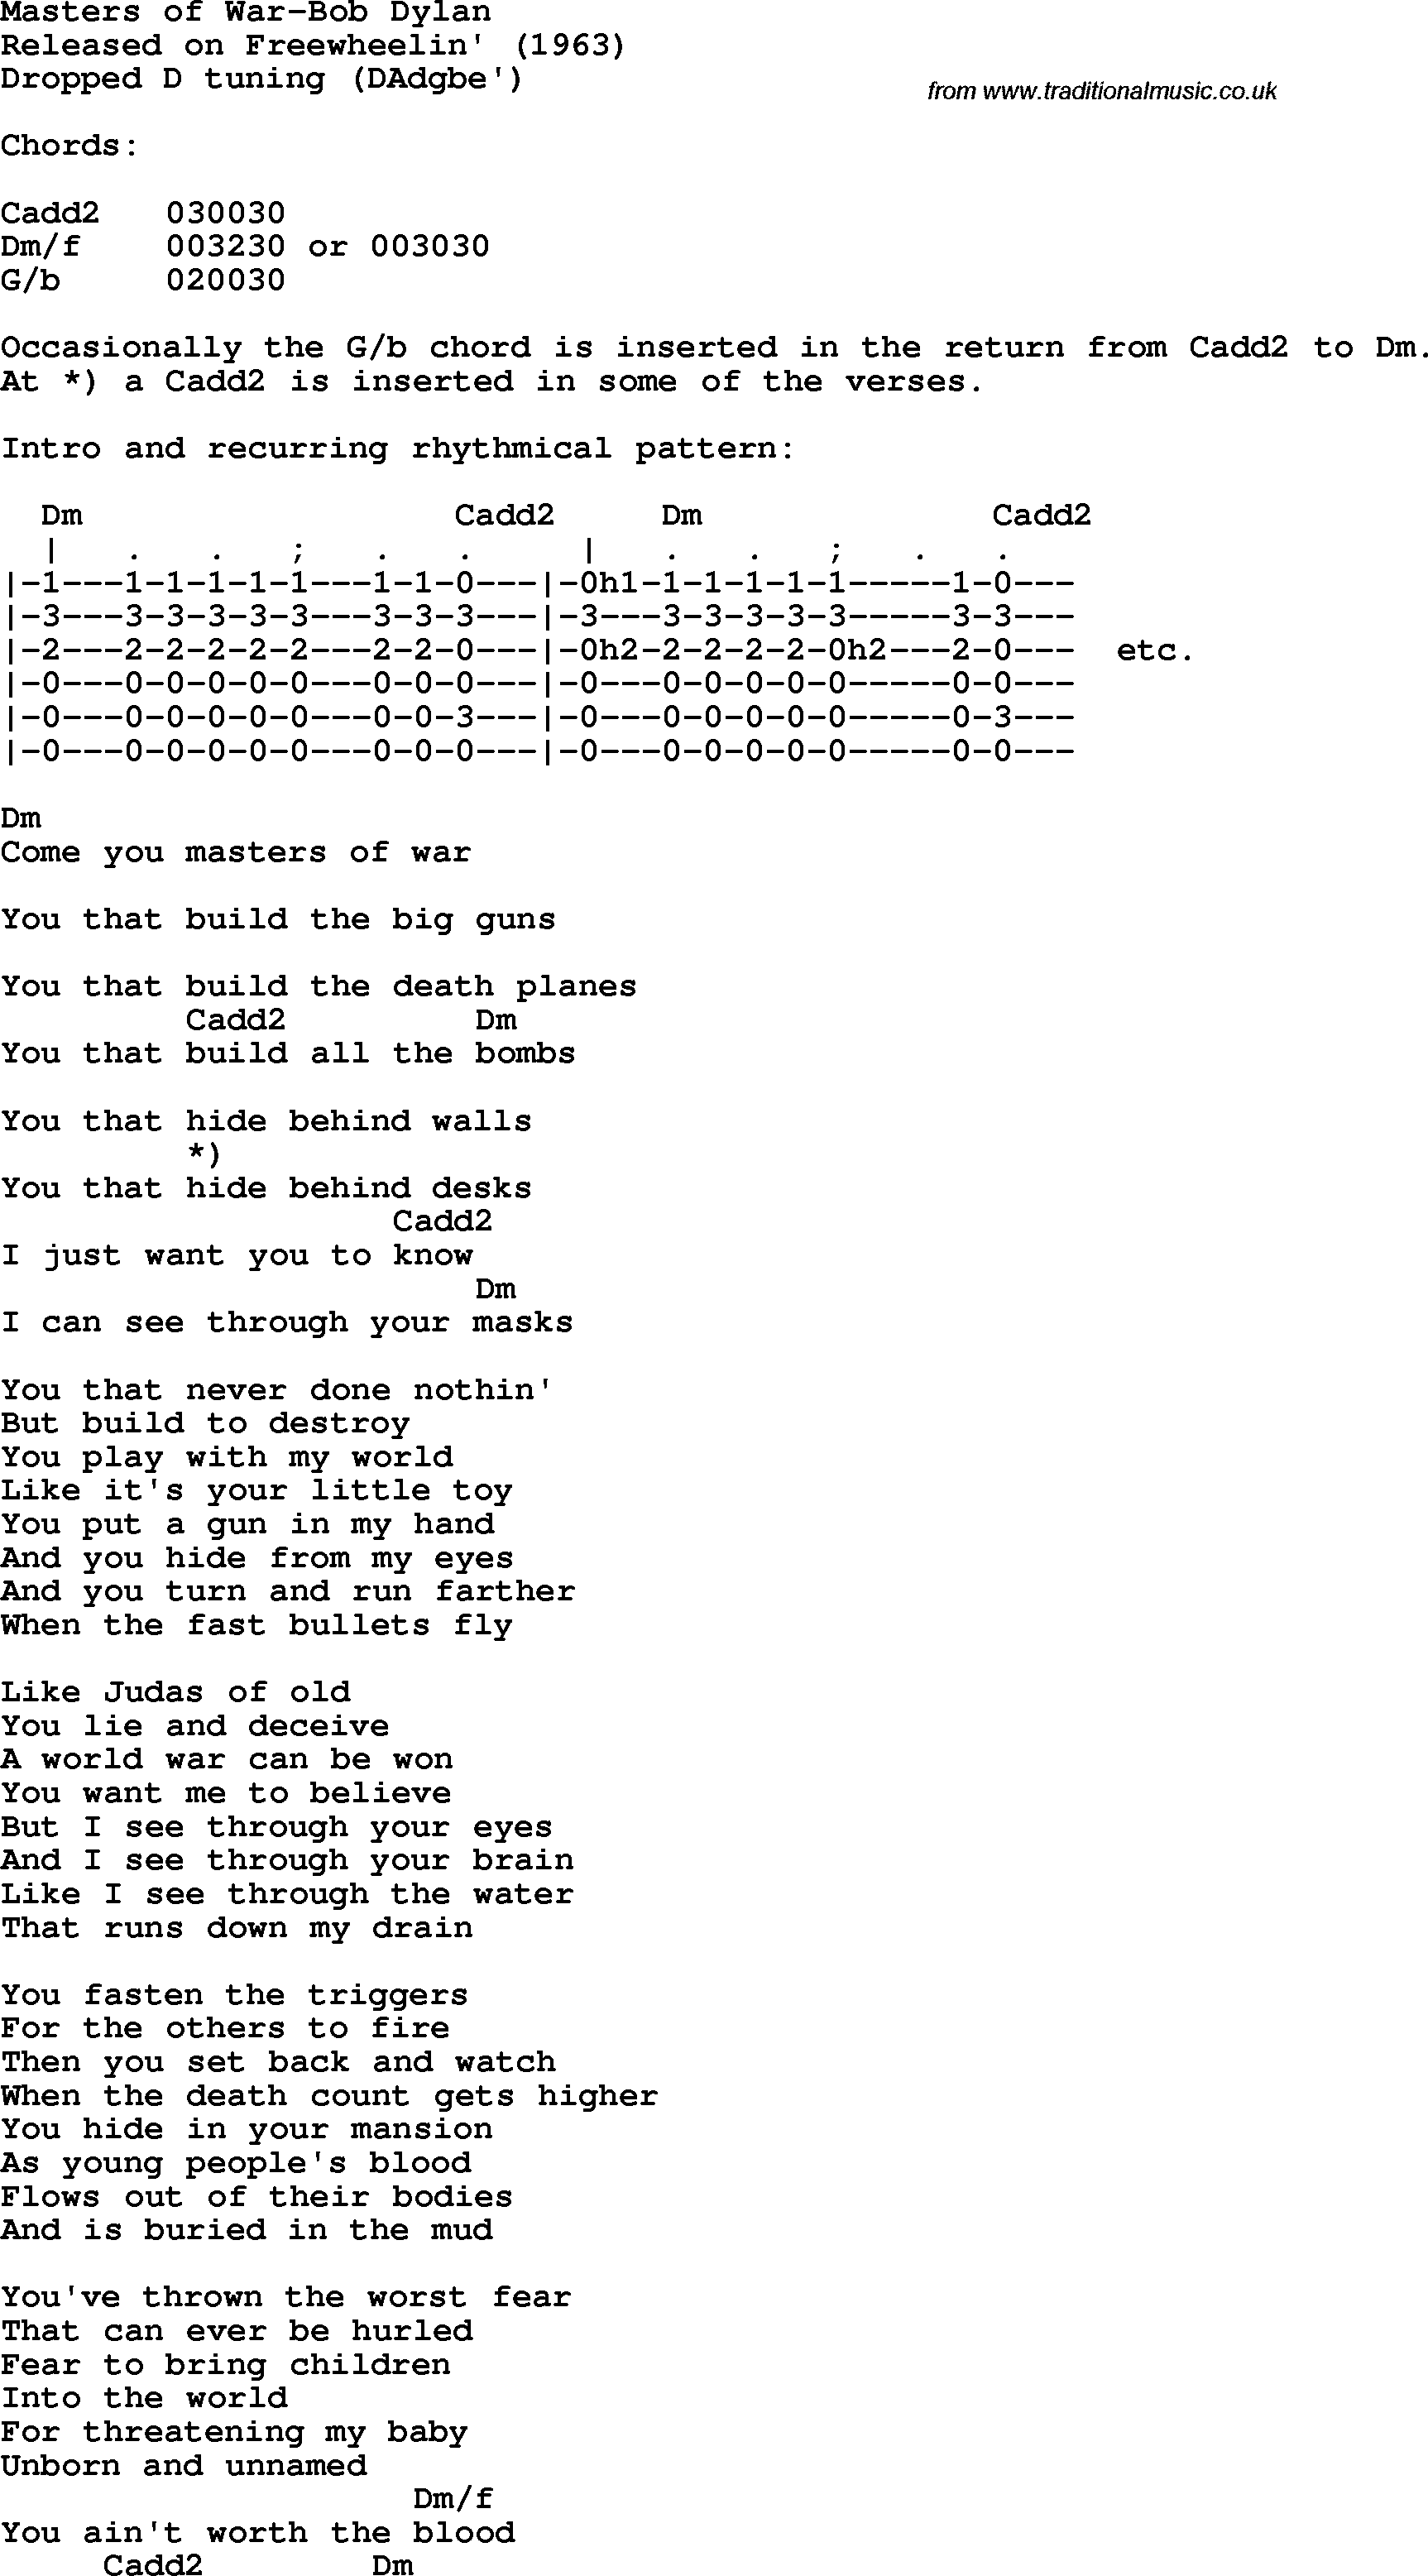 Protest Song Masters Of War-Bob Dylan lyrics and chords